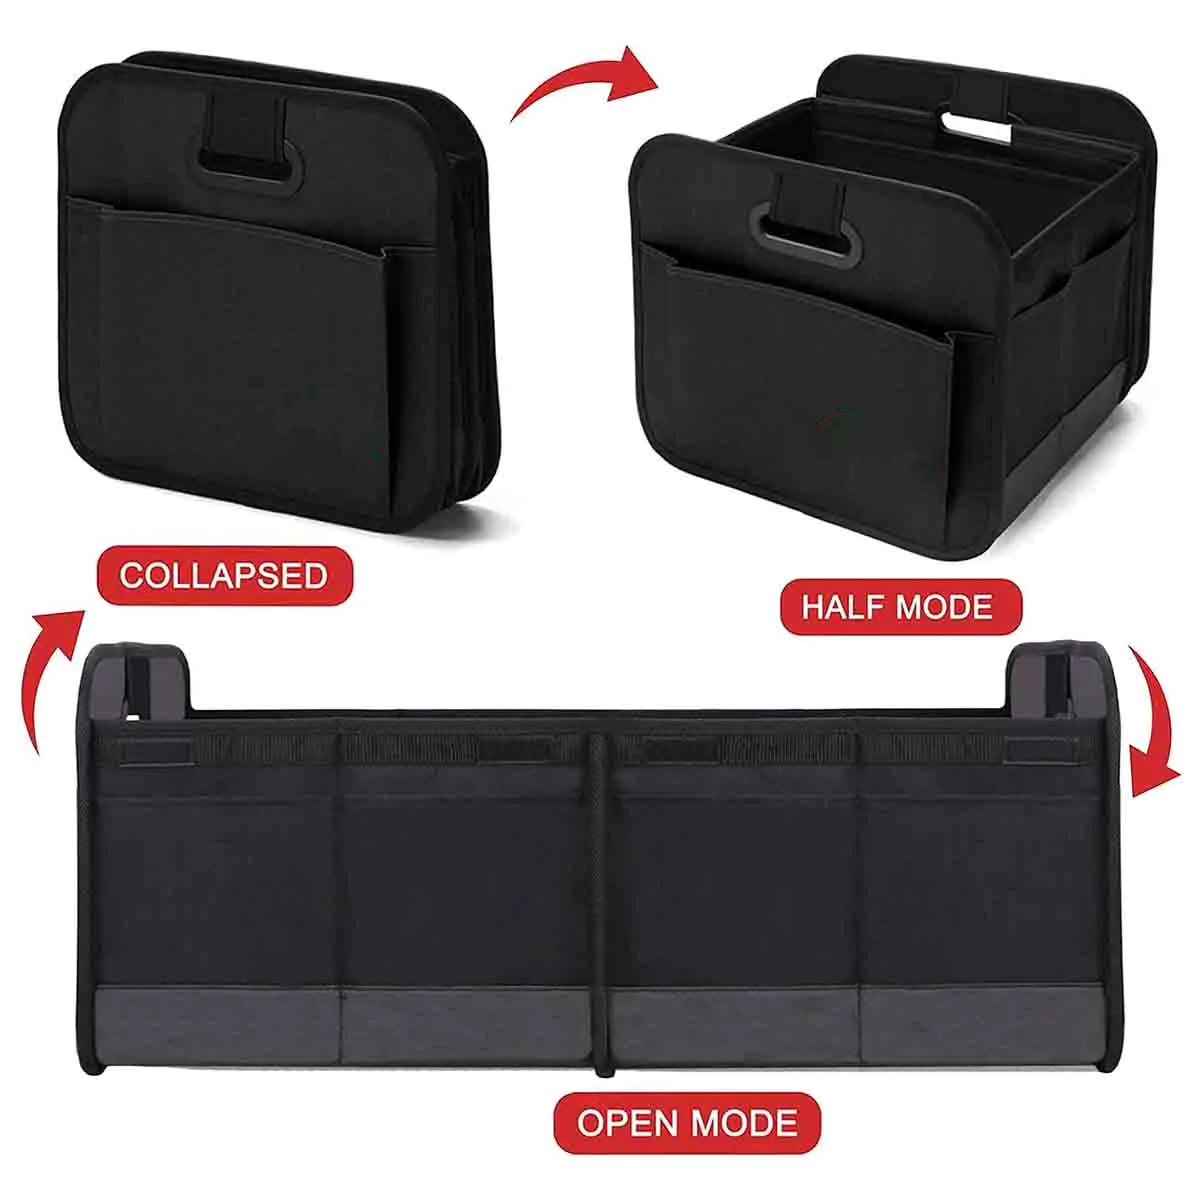 Custom Text For Car Trunk Organizer Storage, Compatible with All Cars, Reinforced Handles, Collapsible Multi, Compartment Car Organizers, Foldable and Waterproof, 600D Oxford Polyester CC12995